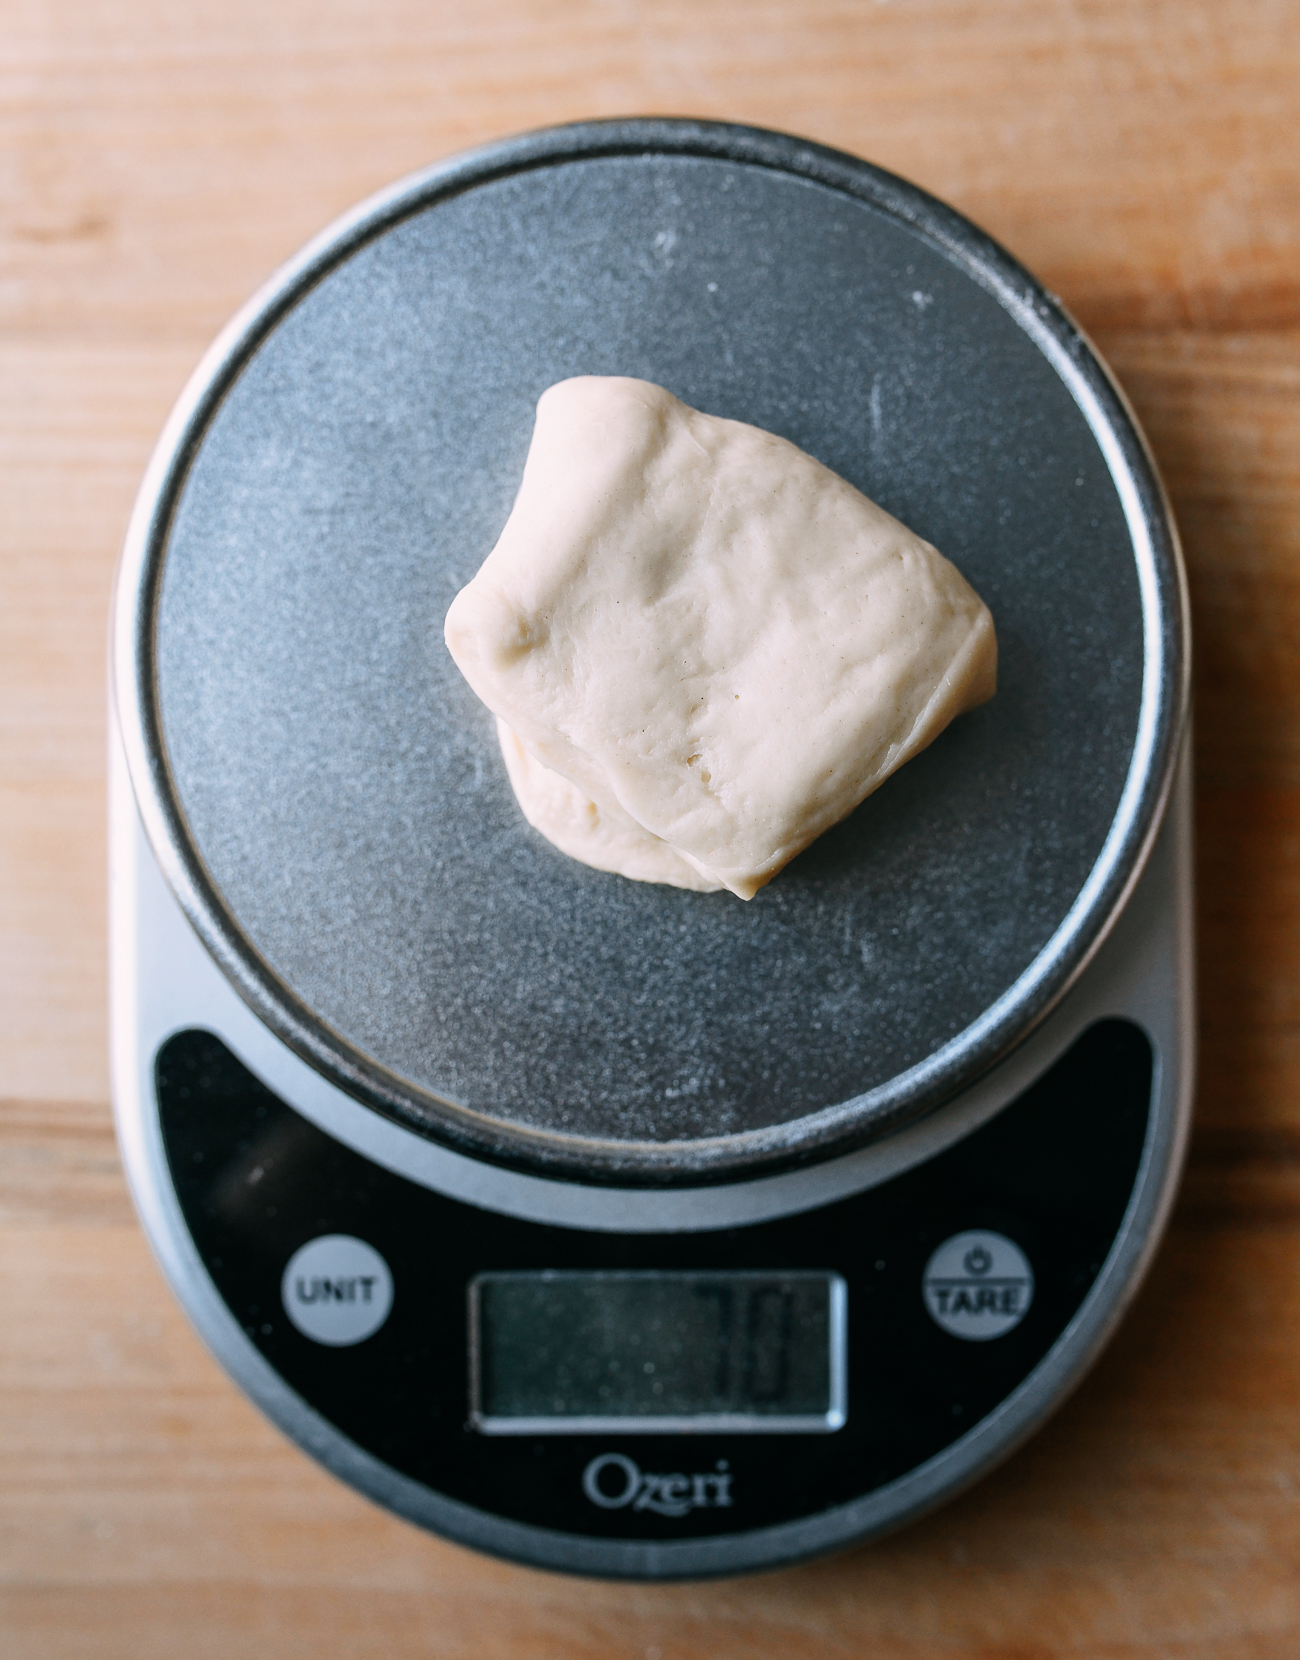 Weighing dough into equal pieces